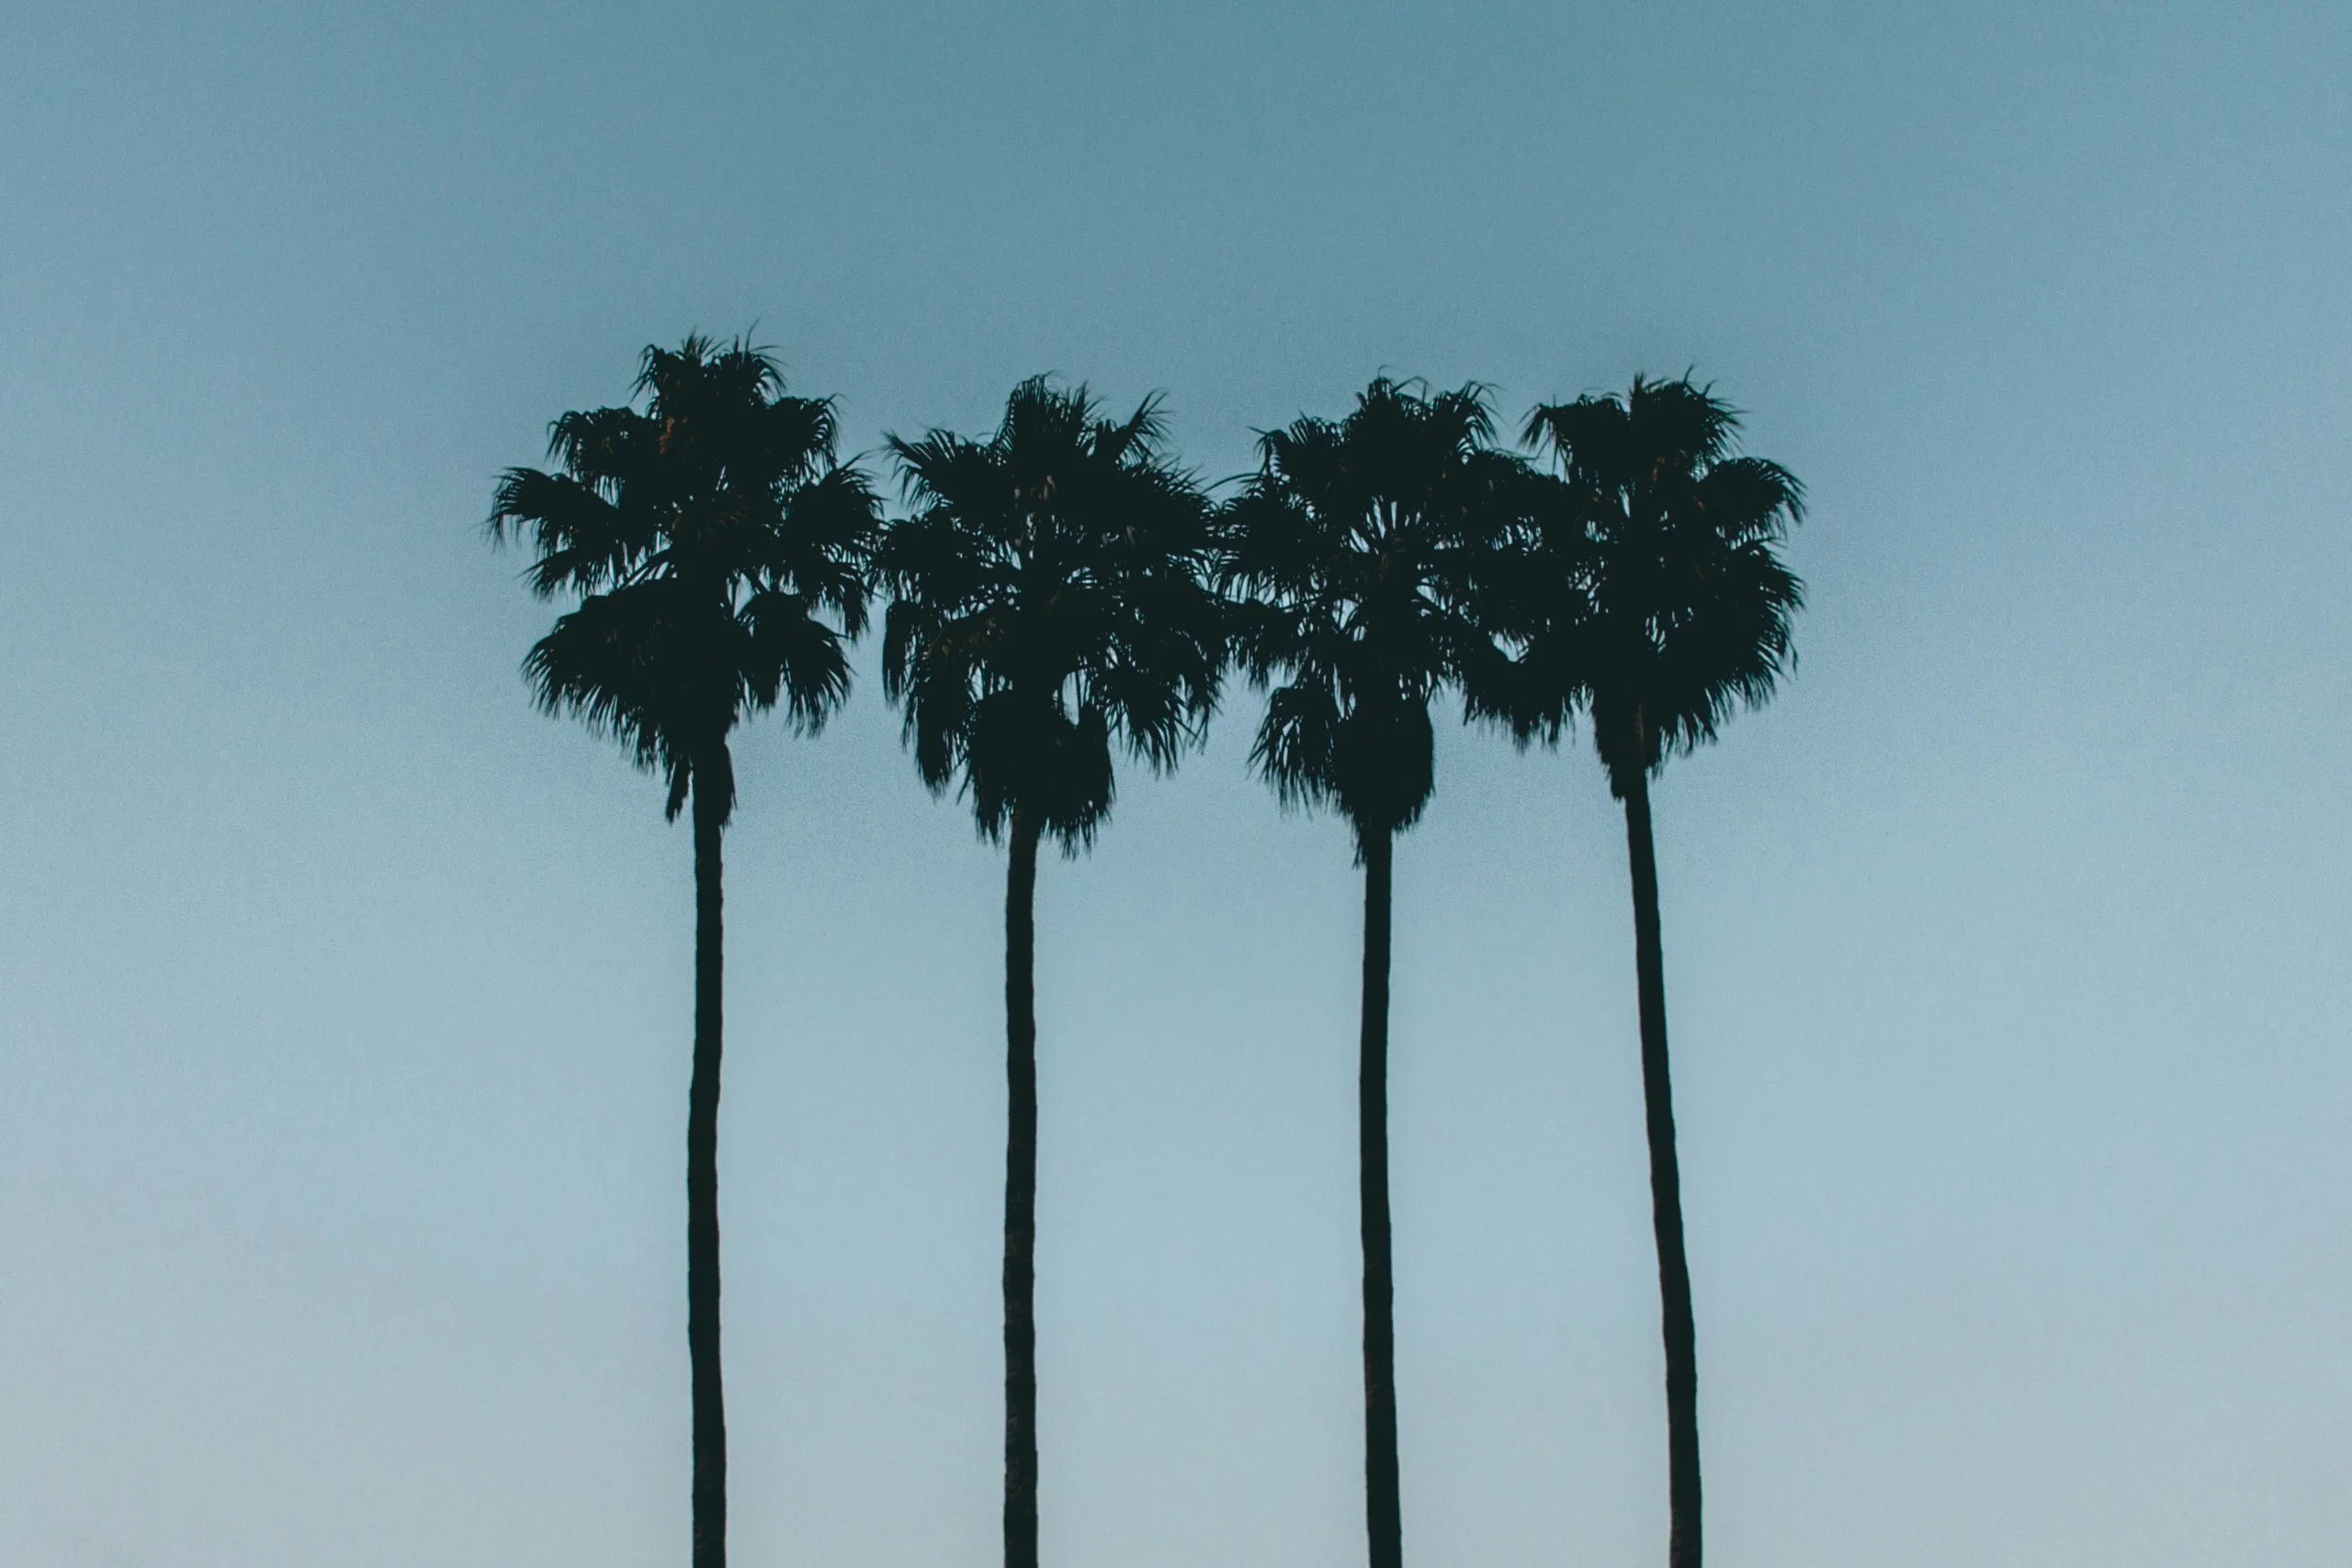 A photograph of palm trees in silhouette against a blue sky